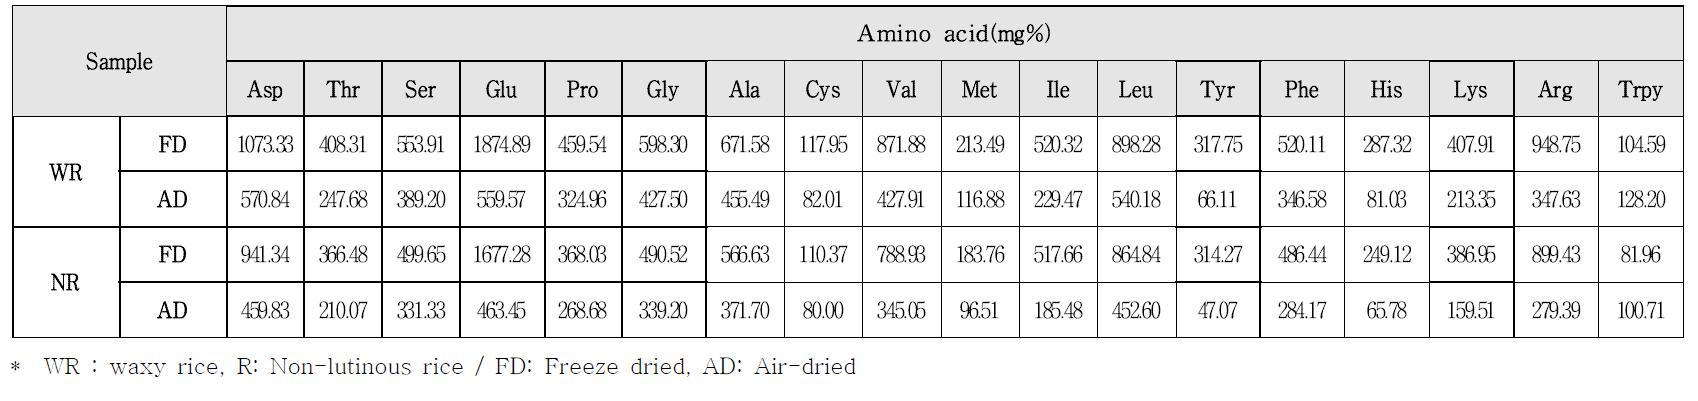 Effect of dehydration on amino acid content of rice for preparation of Olbyeossal from rough rice